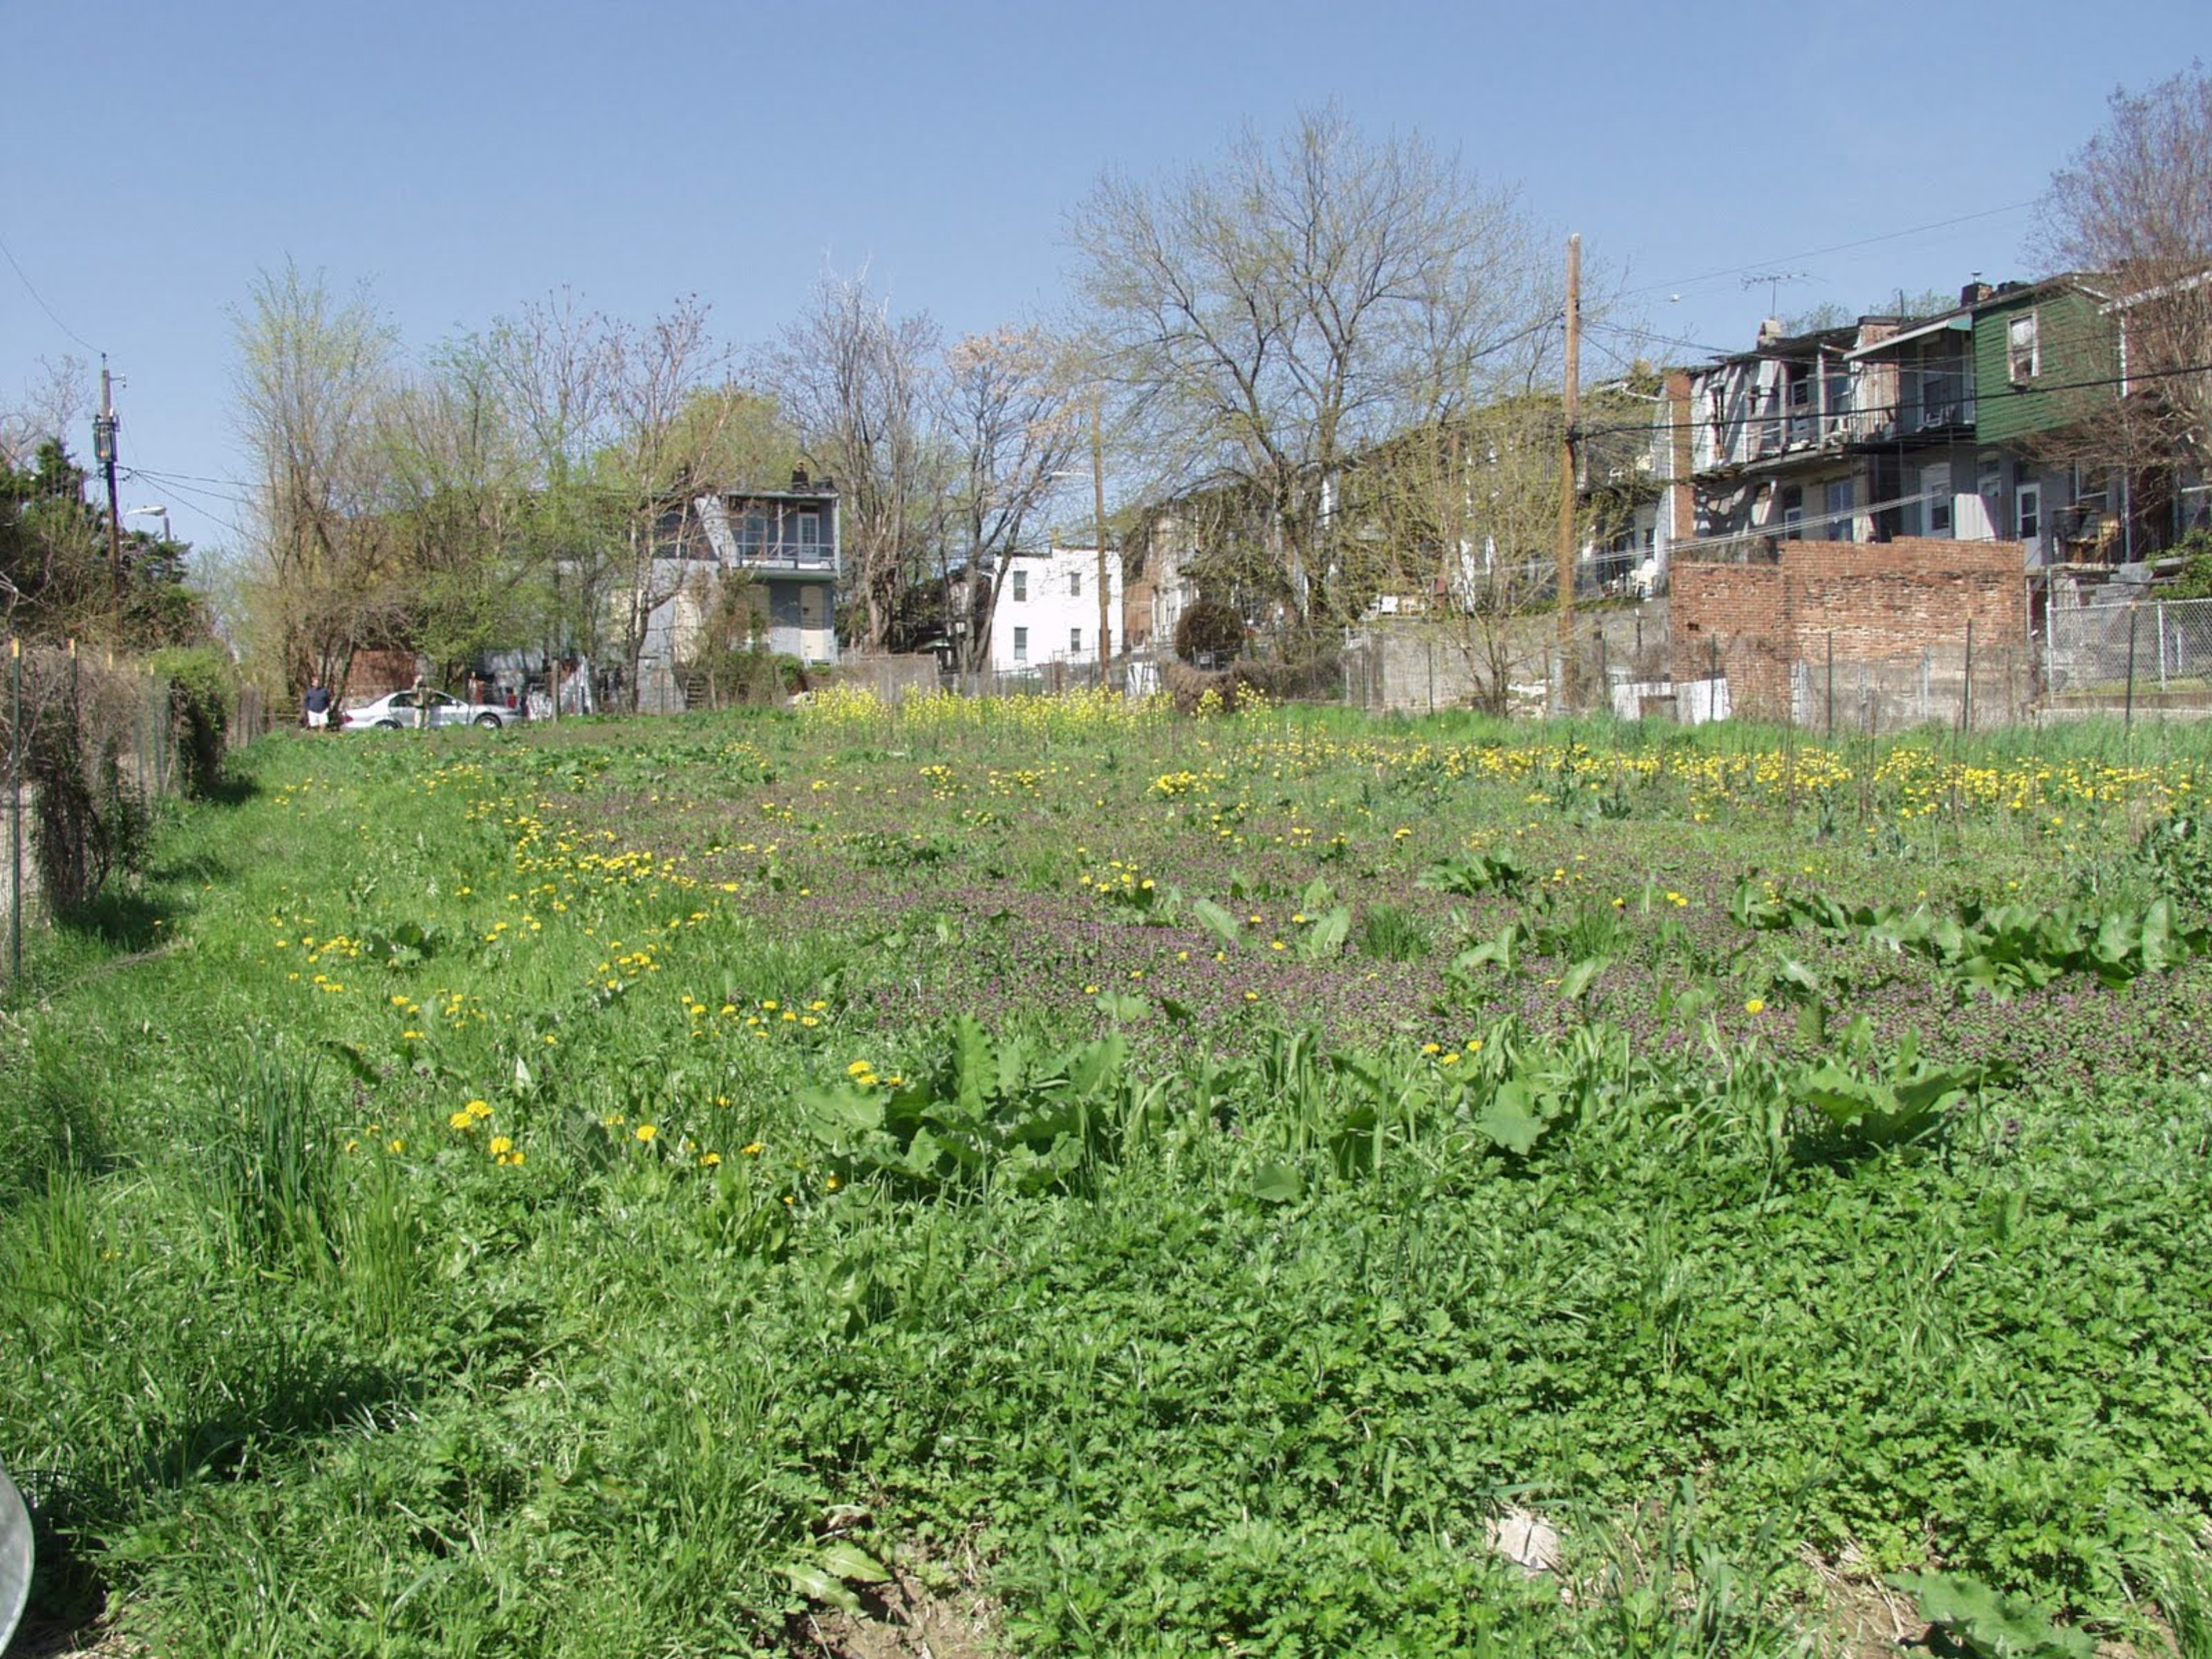 An old community garden plot in an inner block in west Baltimore.  Uncultivated at the time of the photo, annual and short lived perennial colonizing plants are predominant.